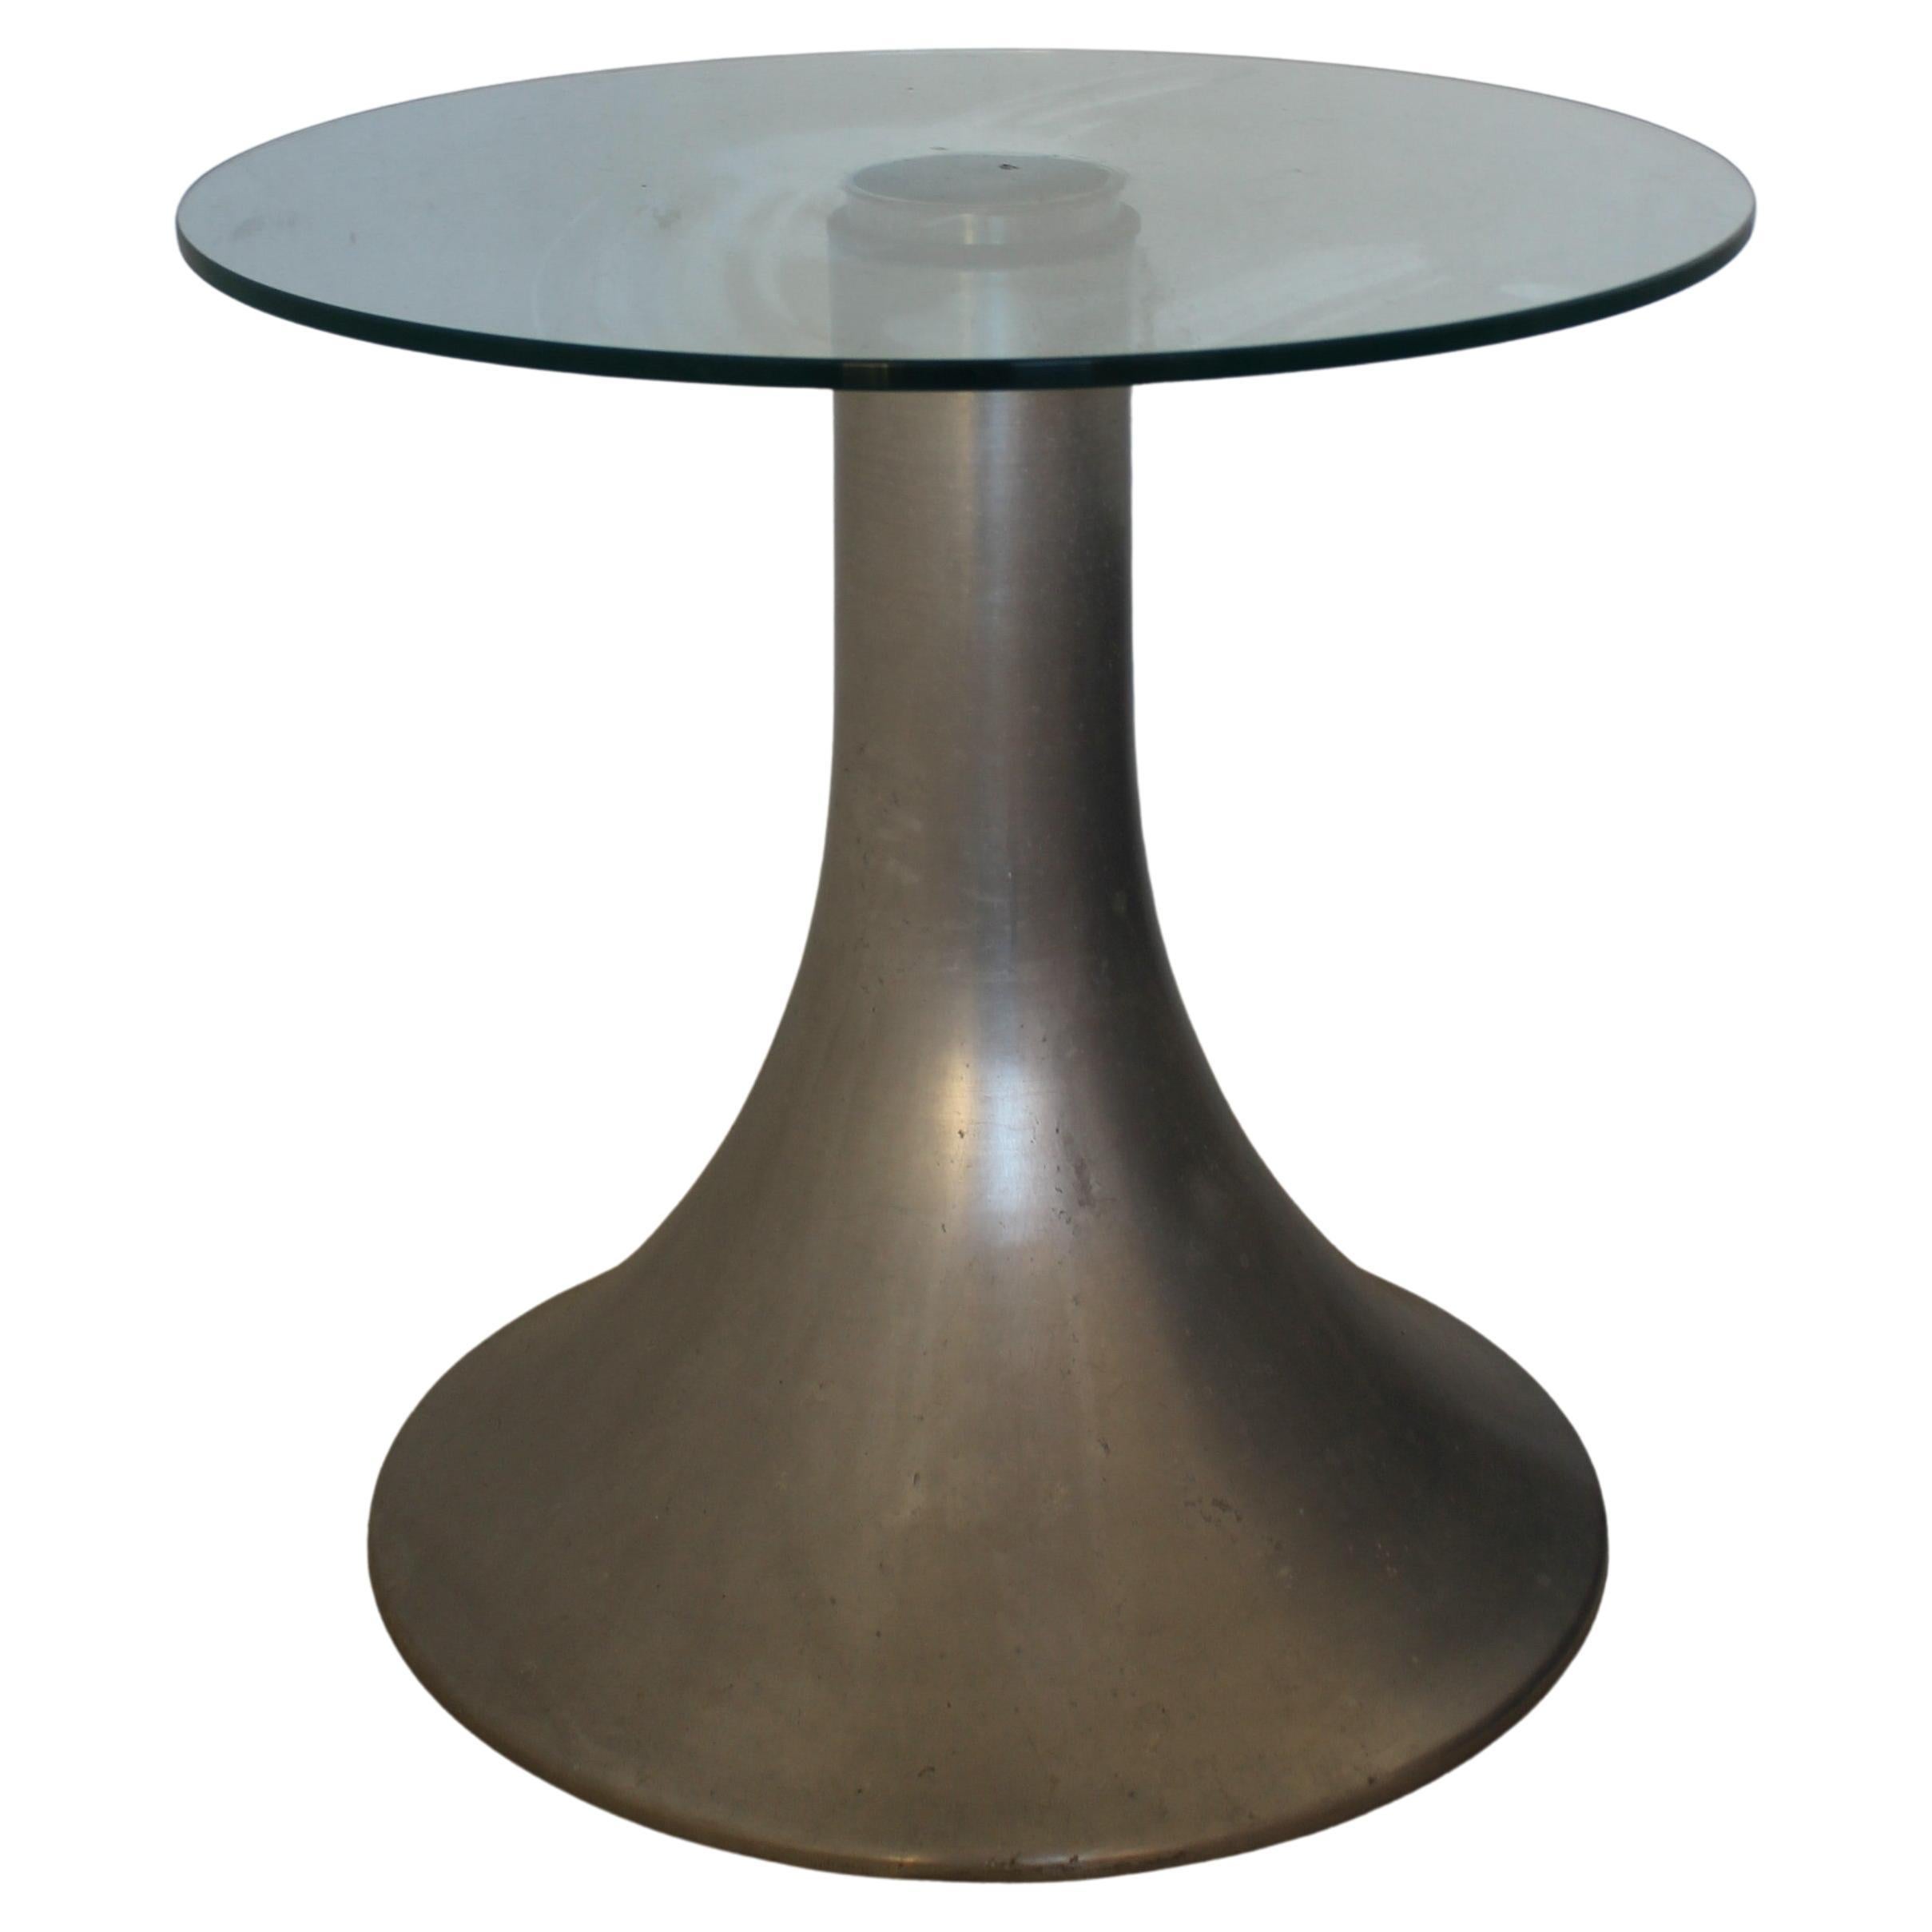 MidCentury Modern aluminium and glass small side Table, Italy 70s

This coffee table with conical truncated aluminium base and glass top is a typical example of Italian Design of 1970s.